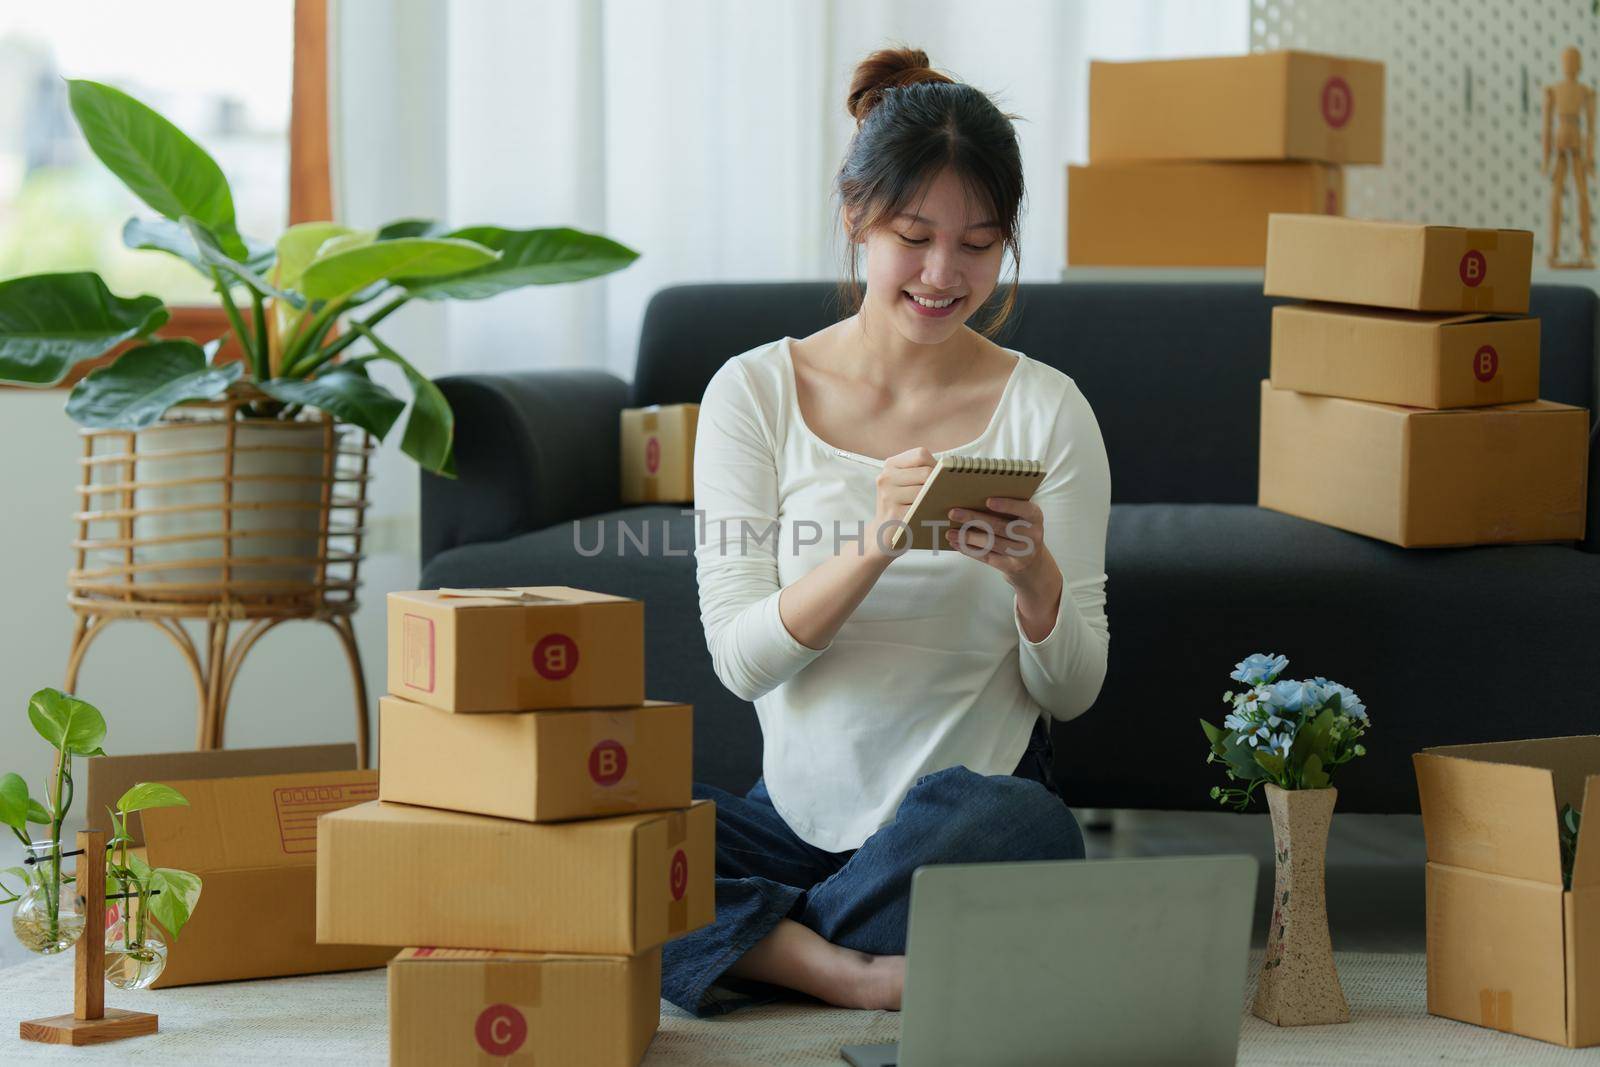 Asian small business owner working at home office. Business retail market and online sell marketing delivery, SME e-commerce concept